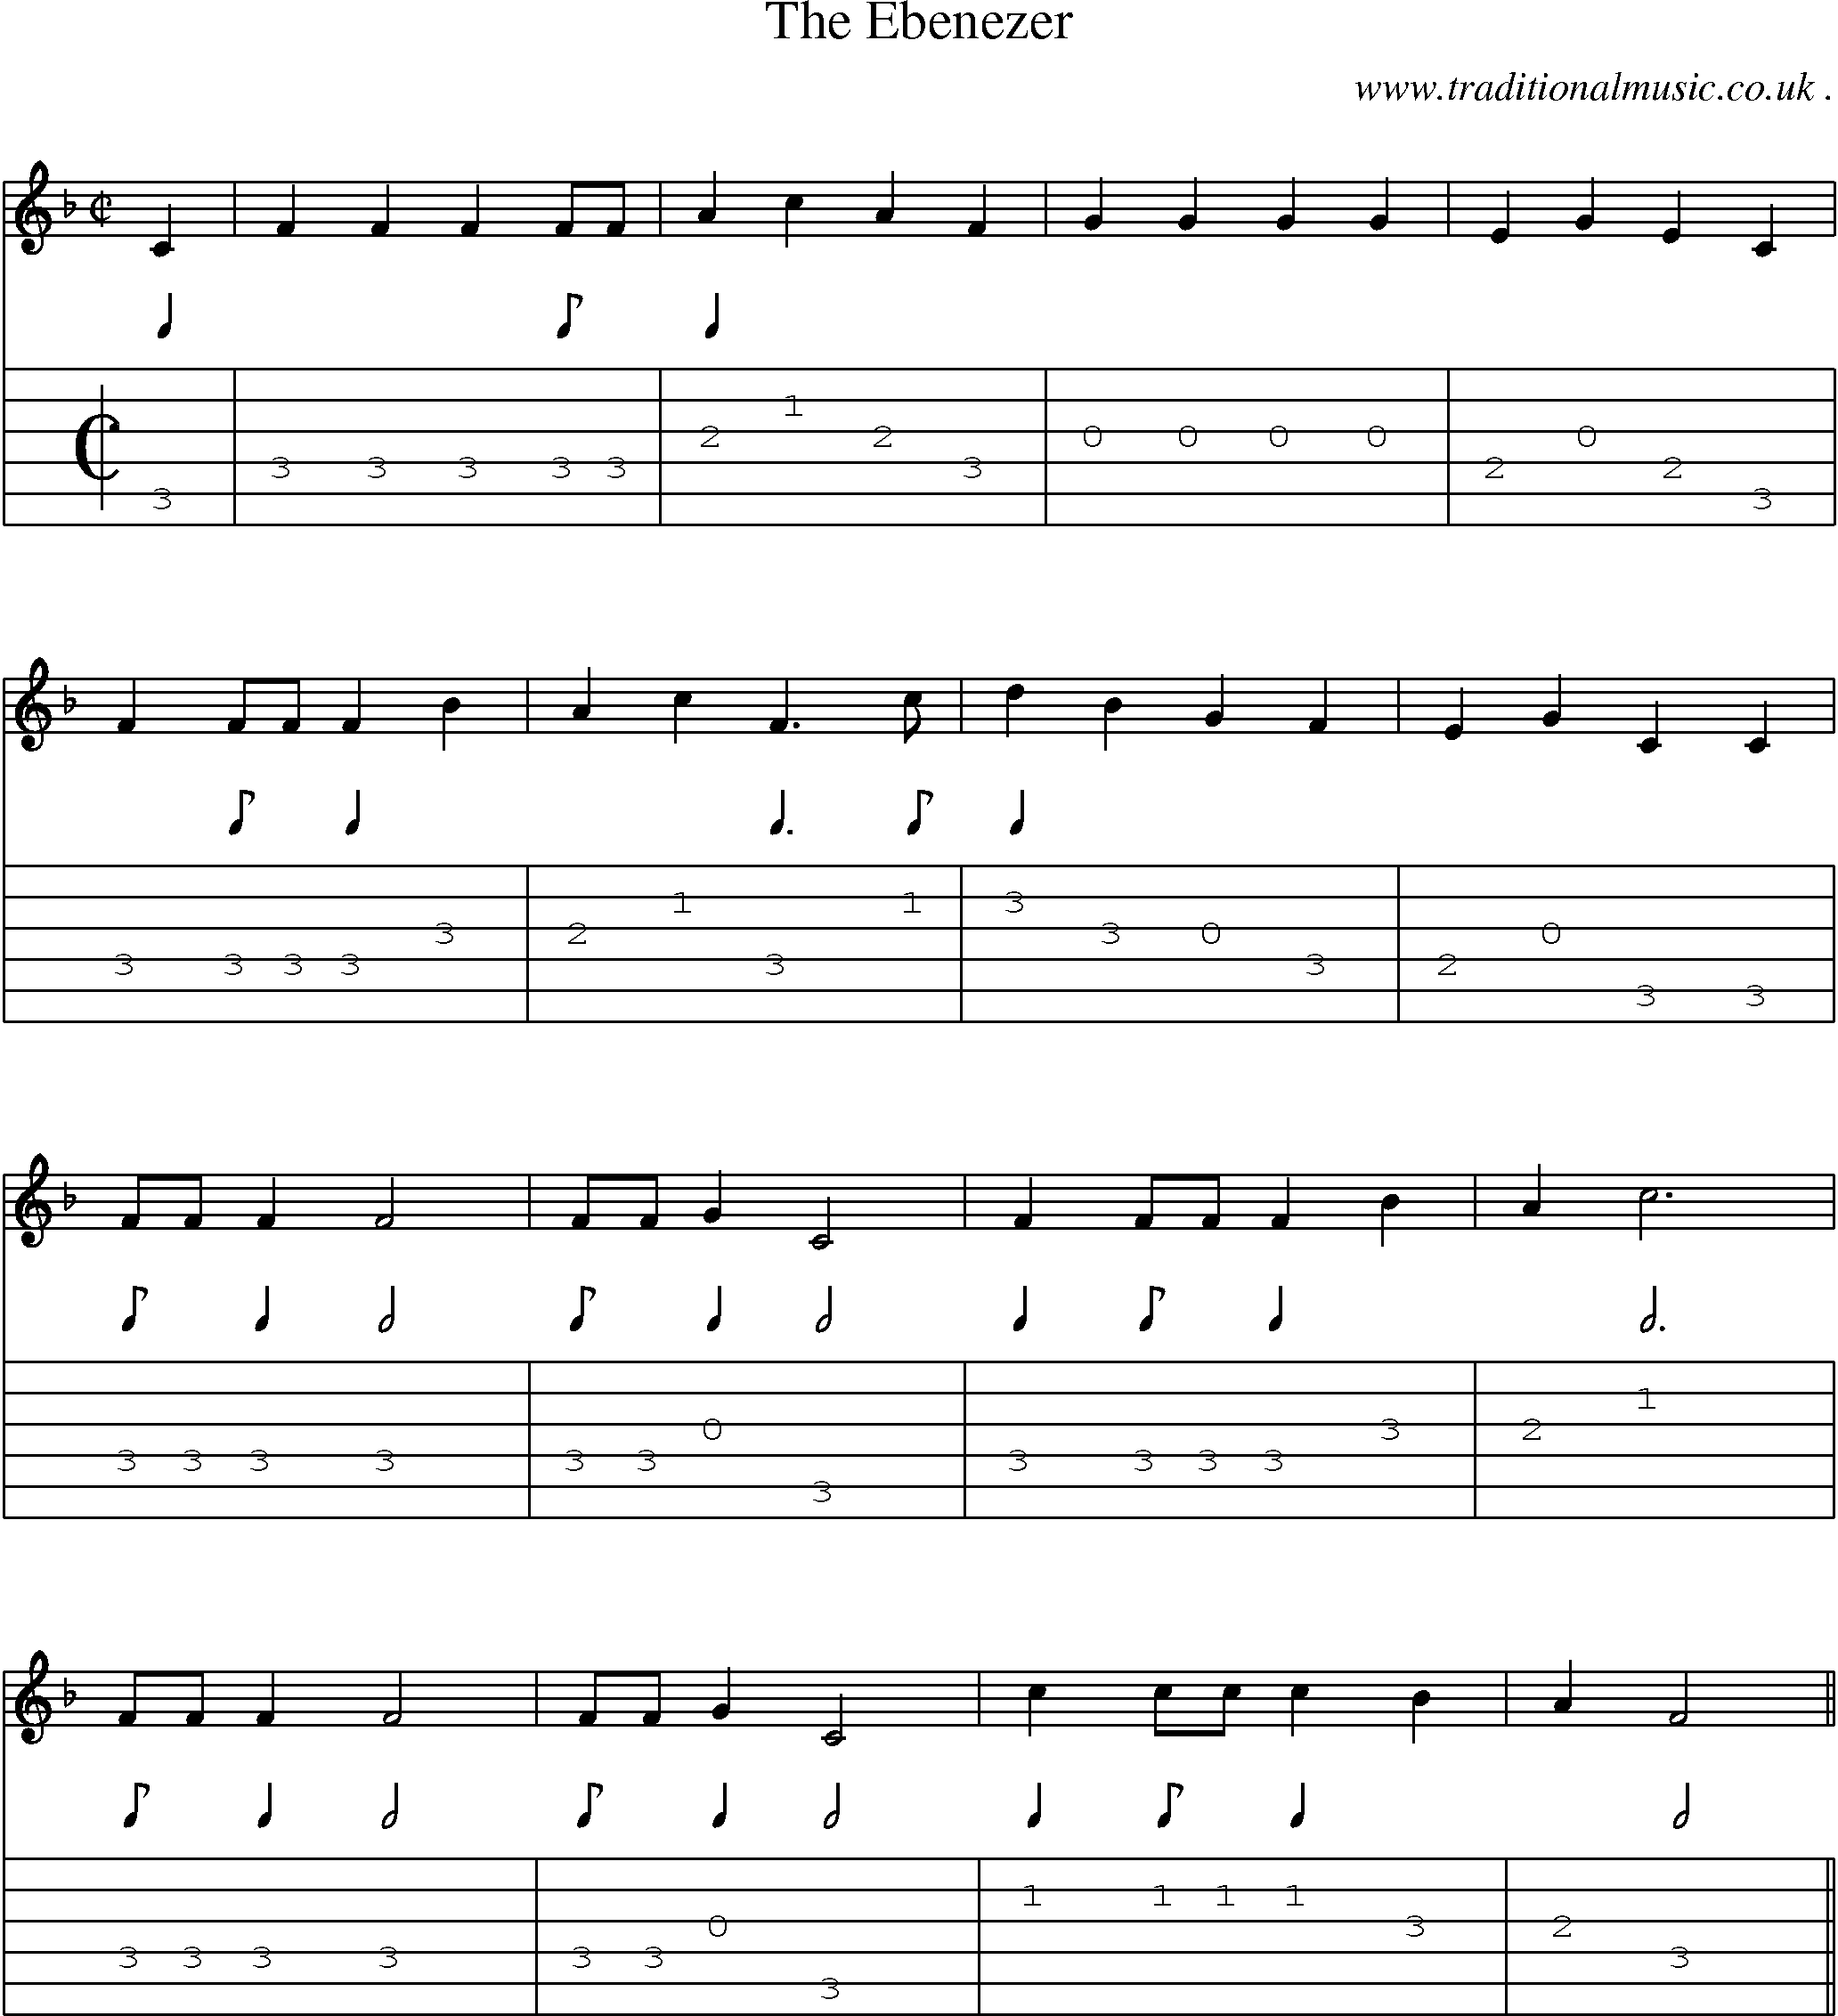 Sheet-Music and Guitar Tabs for The Ebenezer